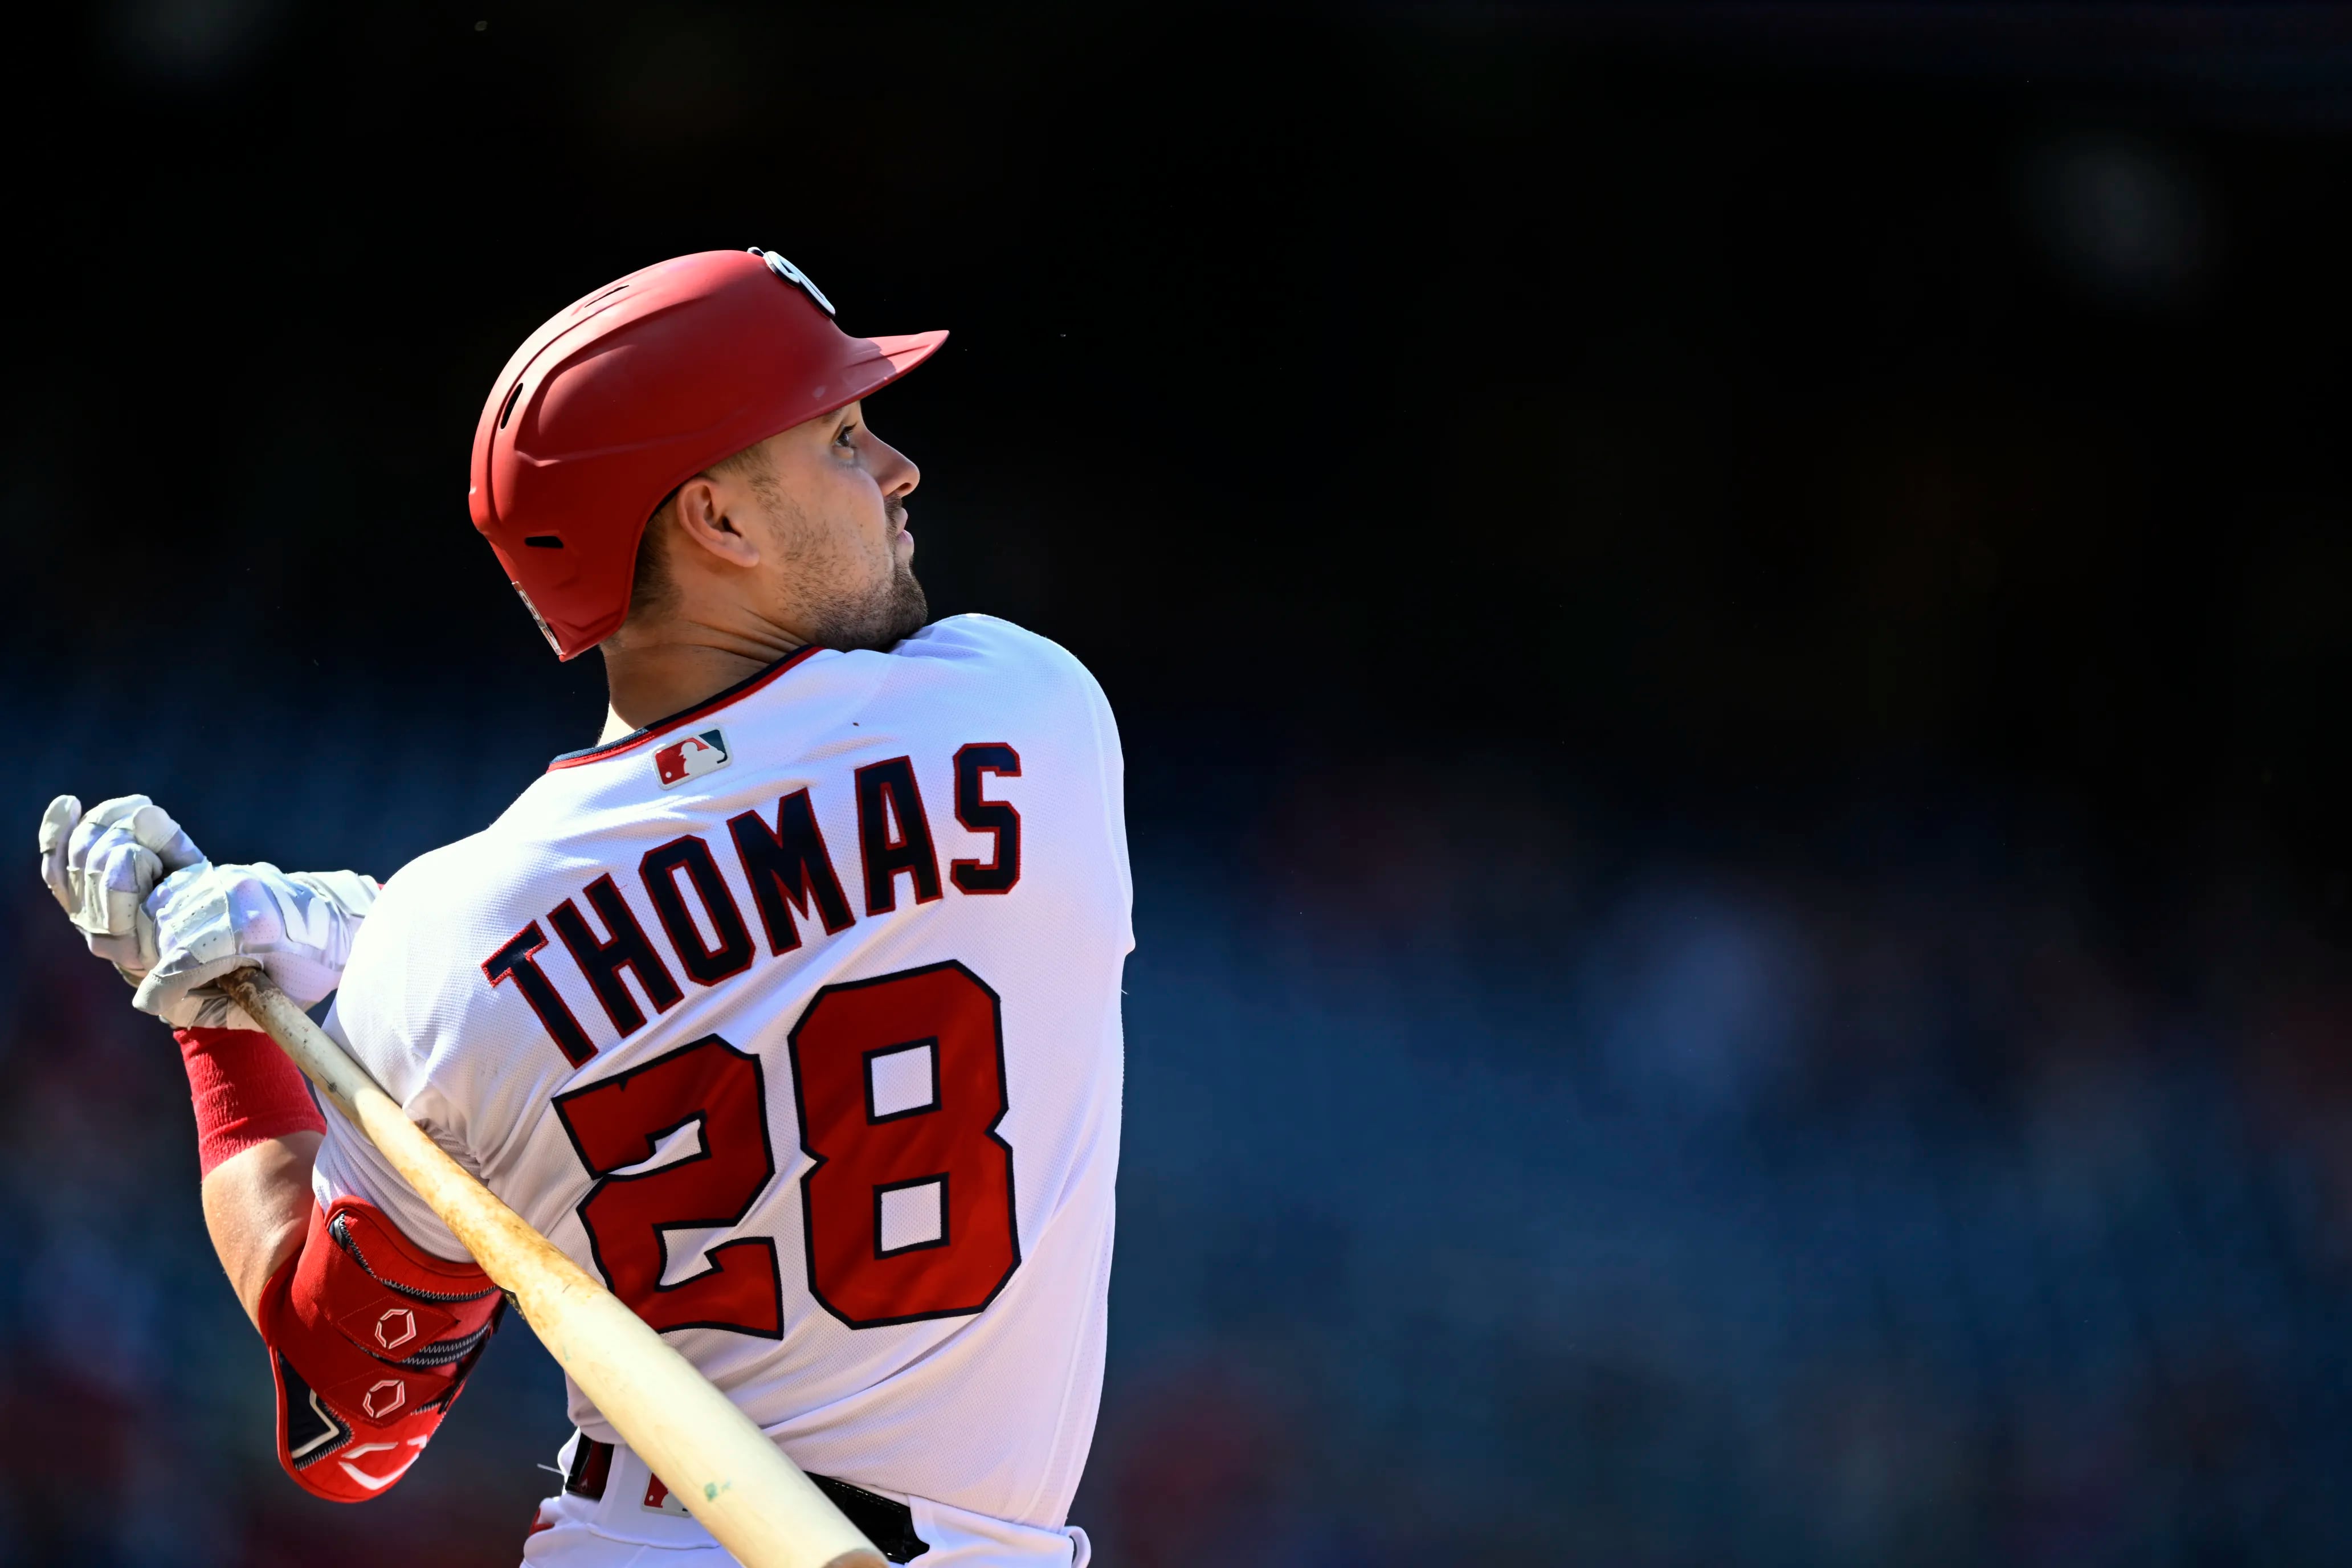 Nationals outfielder Lane Thomas is batting .375/.422/.652 with seven homers against left-handed pitching.